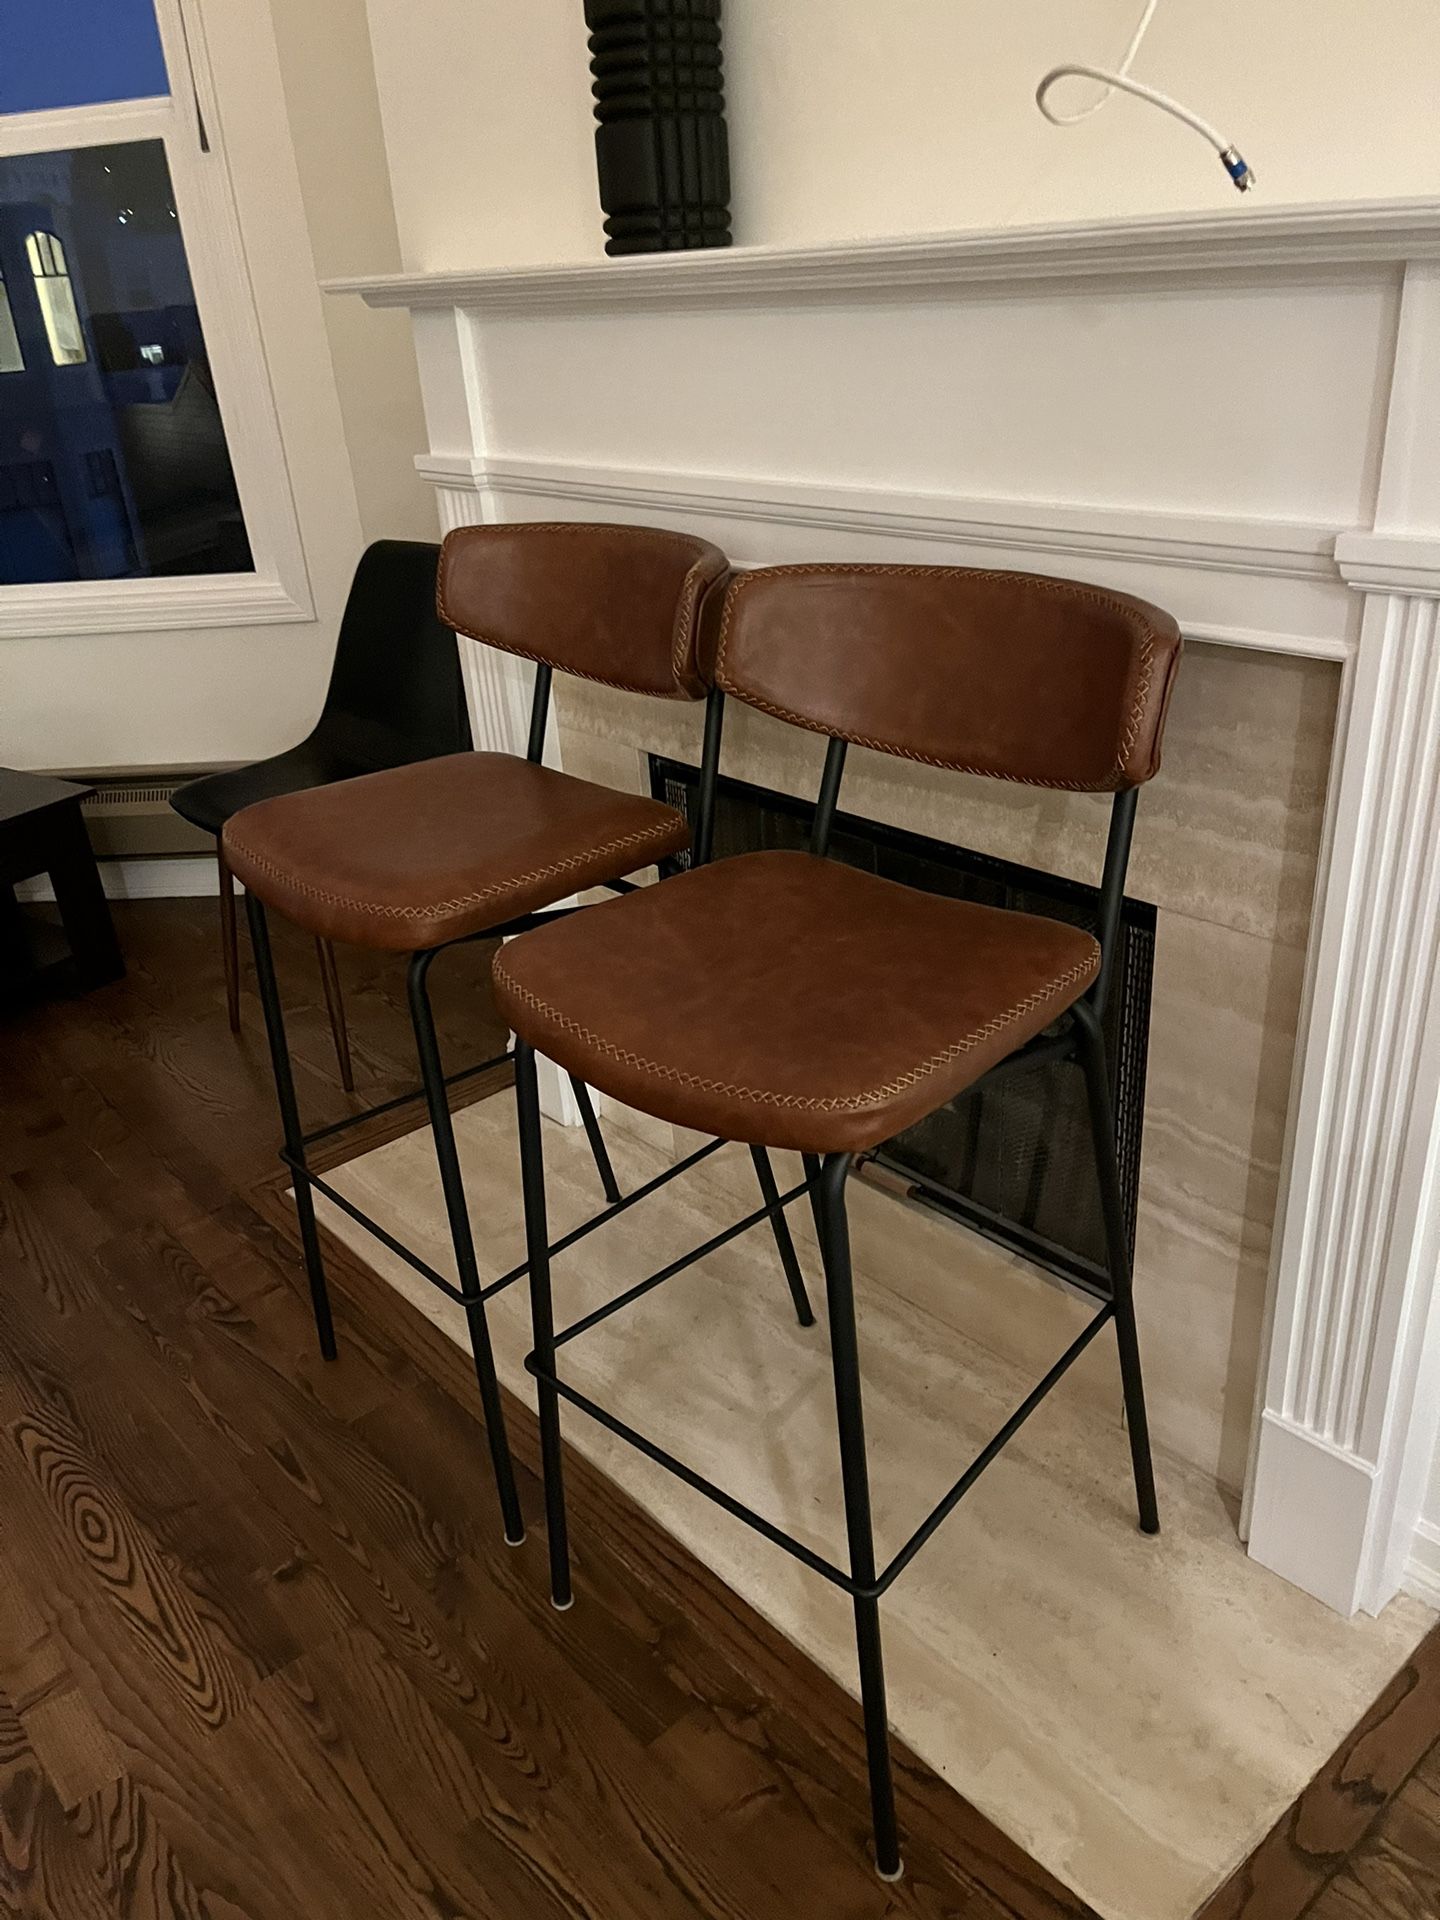 Leather countertop Stools (2)